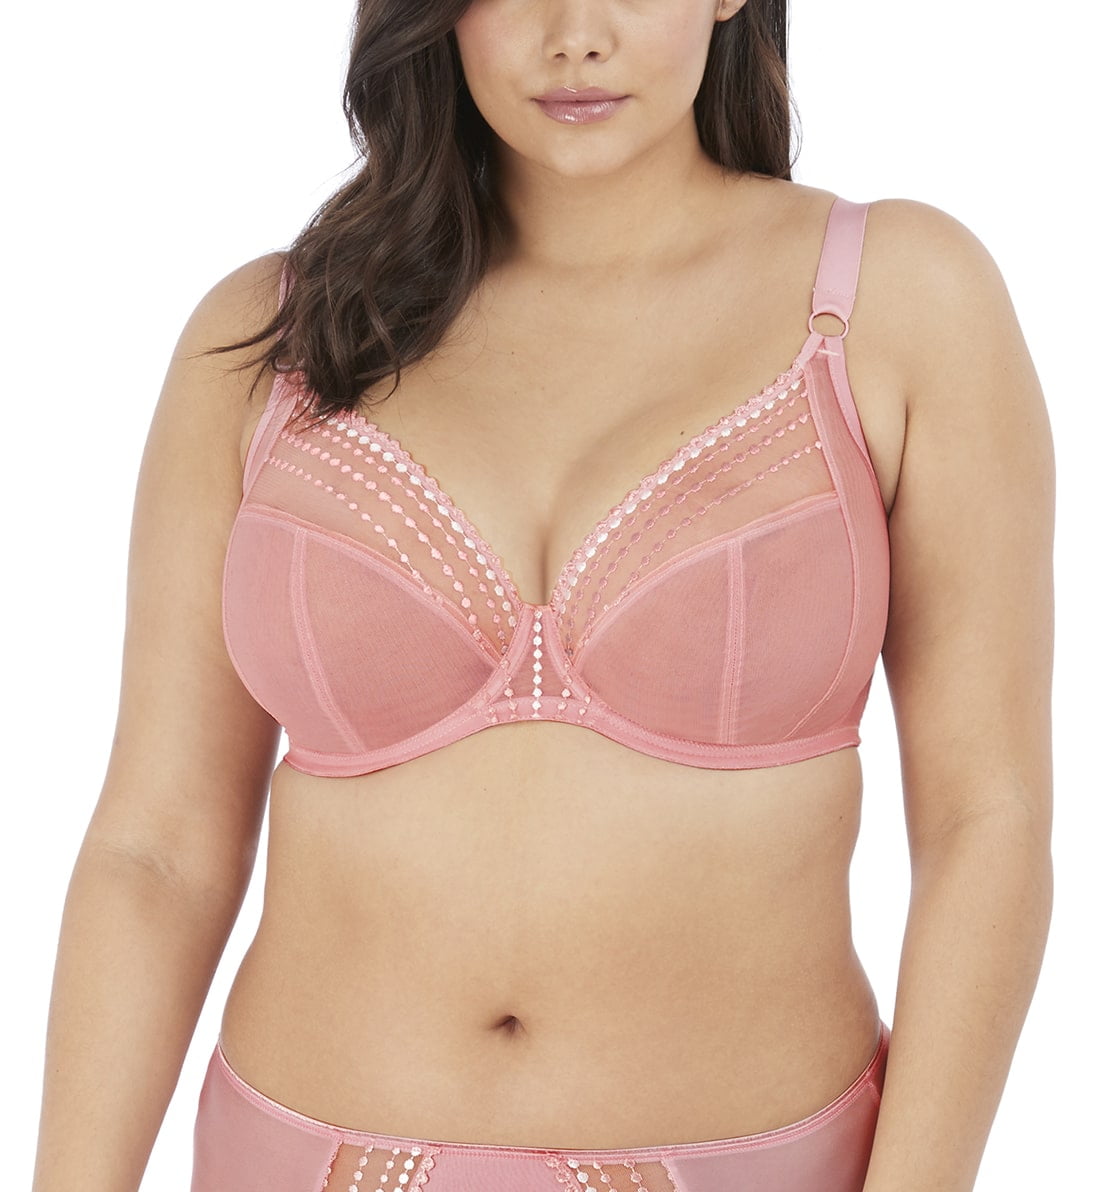 What are the sister sizes of a 40DDD? : r/ABraThatFits